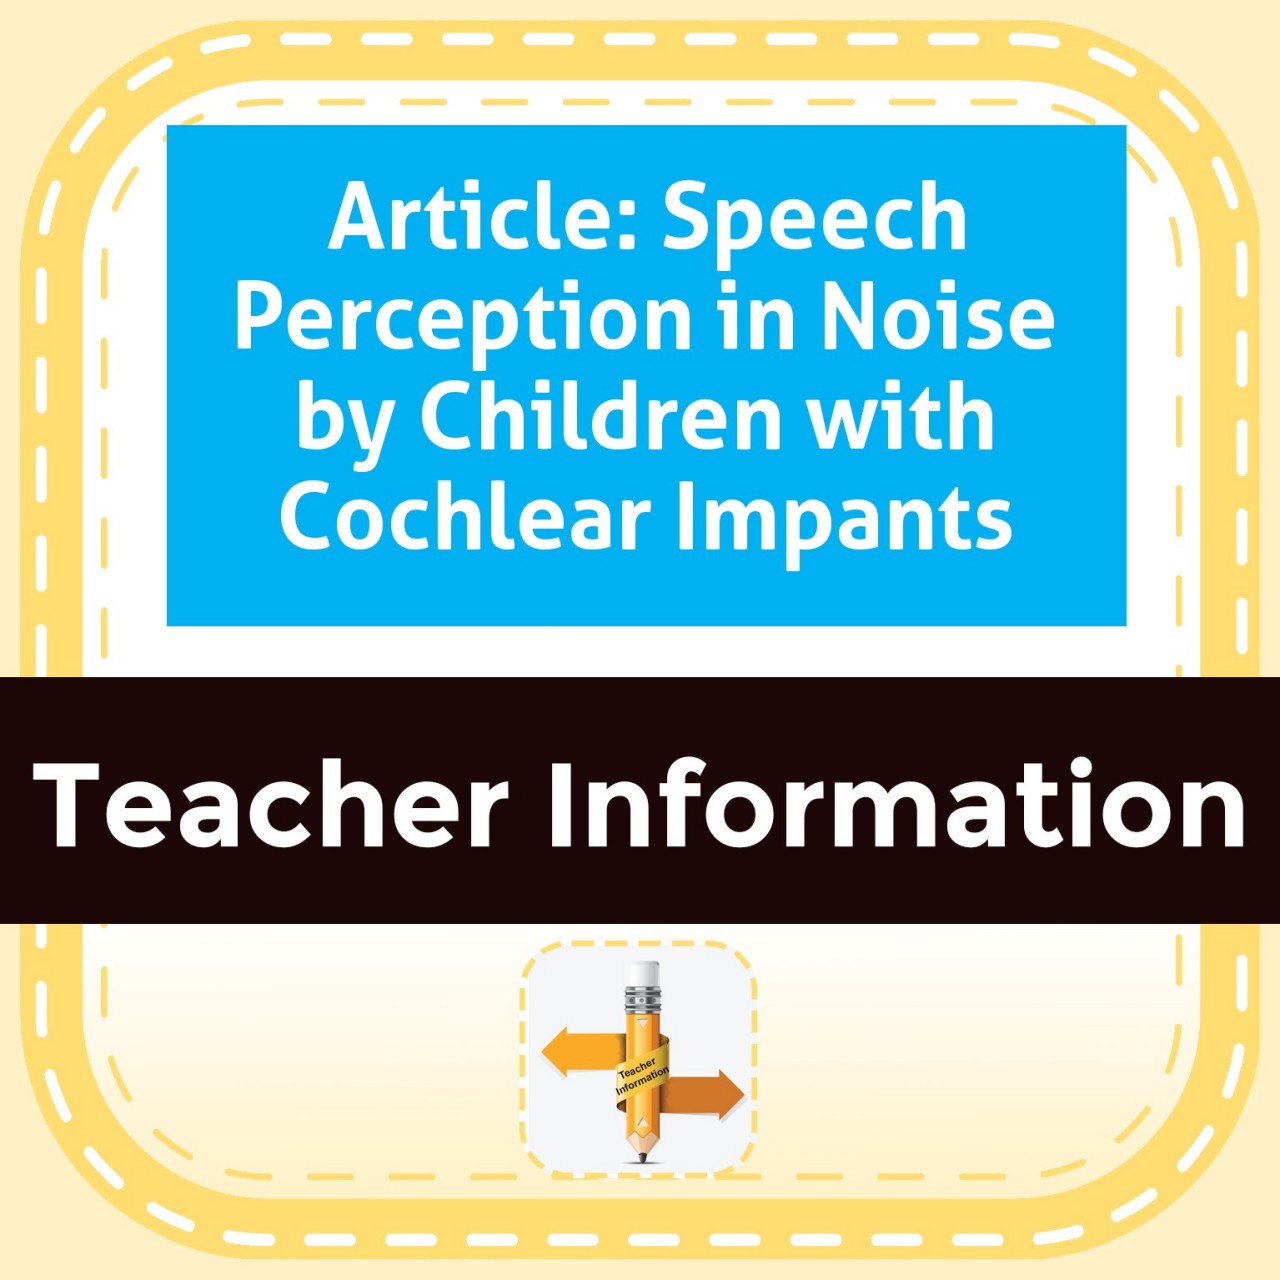 Article: Speech Perception in Noise by Children with Cochlear Impants